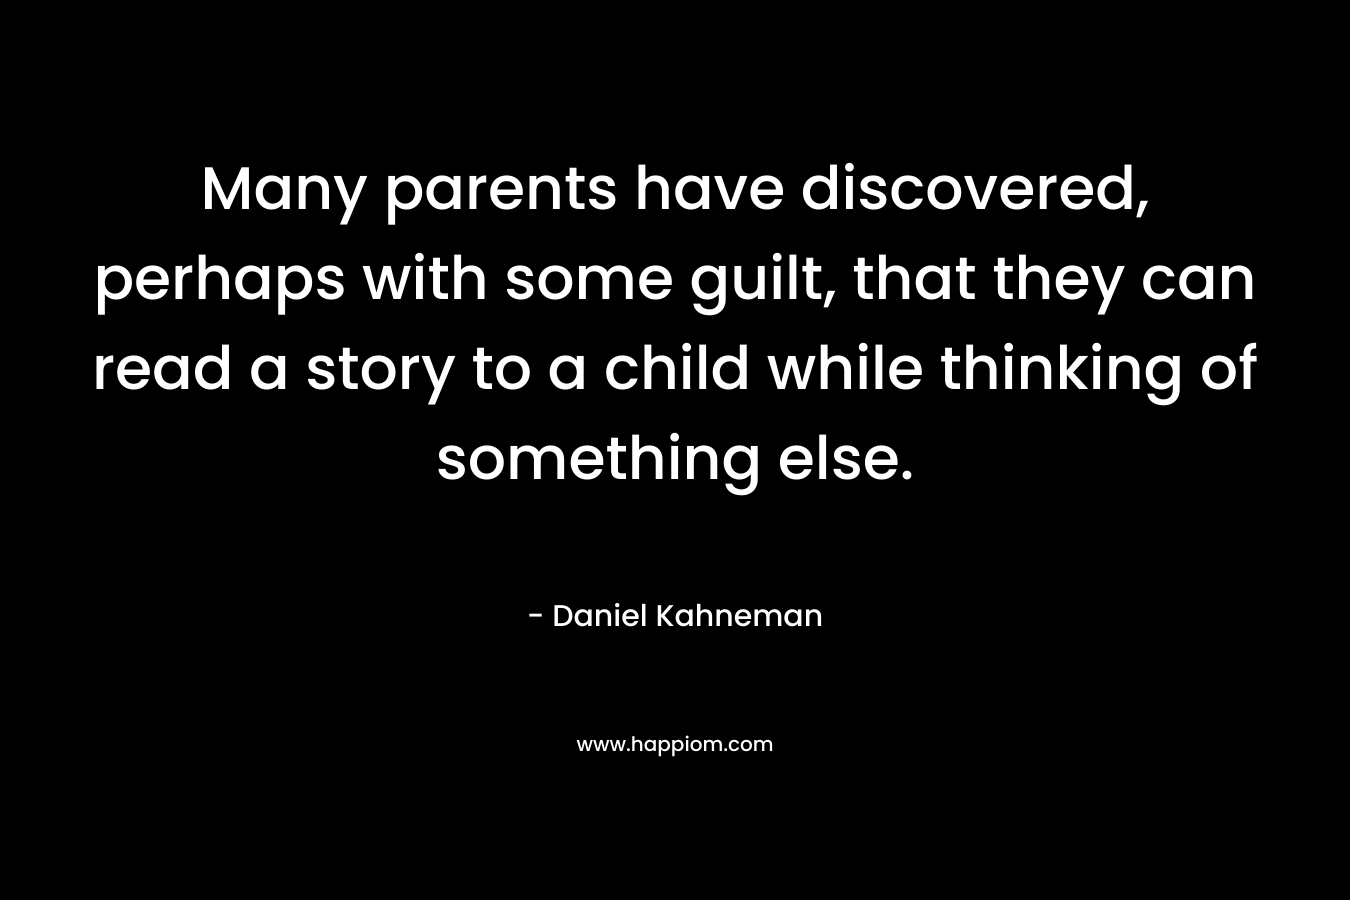 Many parents have discovered, perhaps with some guilt, that they can read a story to a child while thinking of something else. – Daniel Kahneman